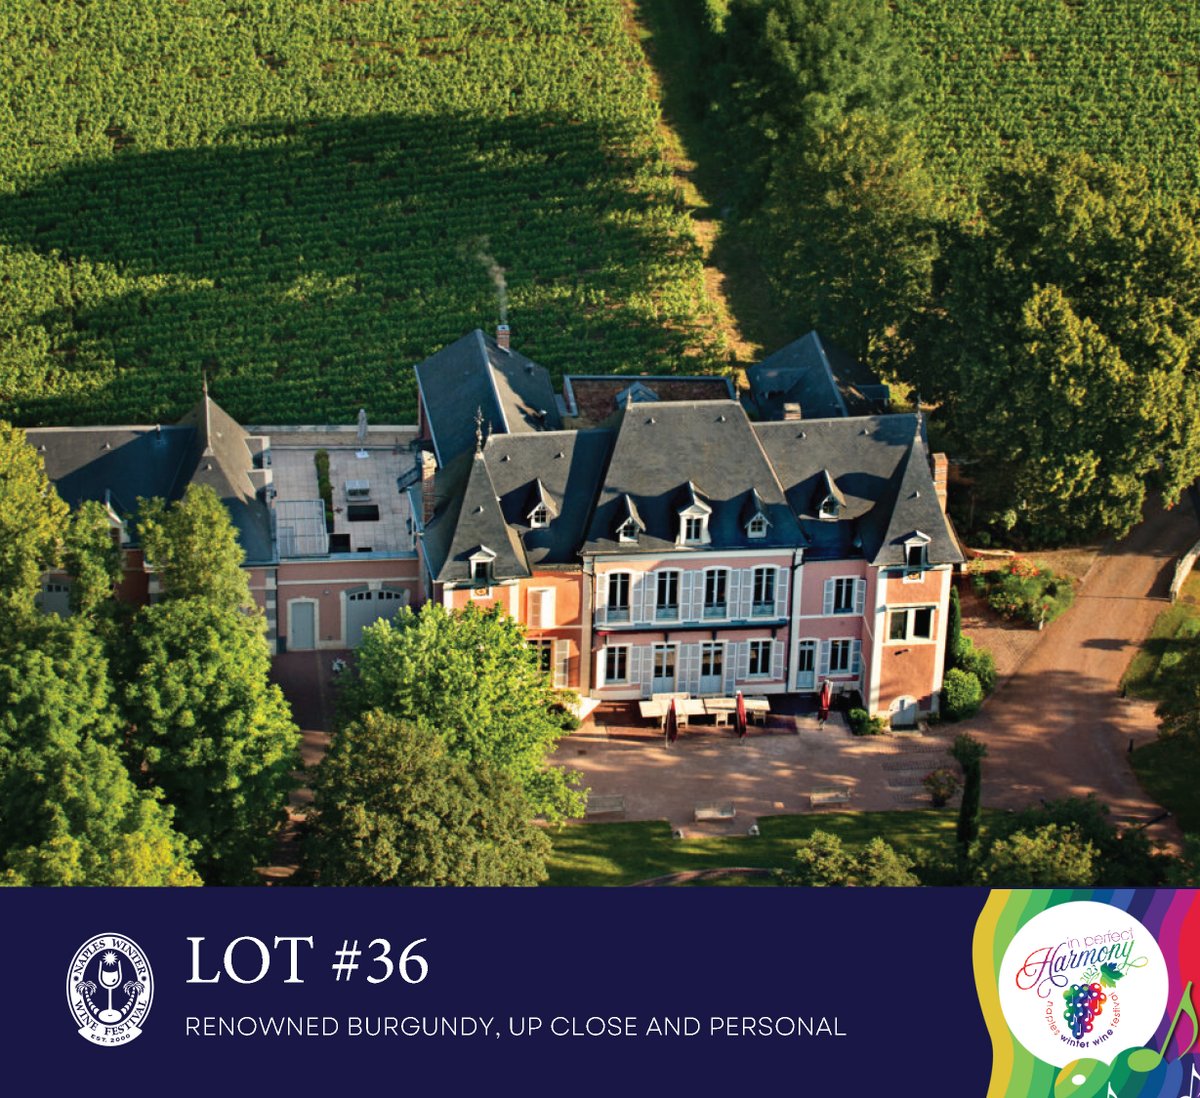 #AuctionLot highlights! Among the incredible roster of auction lots items up for bid is Lot #36 Château de la Crée: “Renowned Burgundy, Up Close and Personal” – A six-night town and country luxury wine experience in Burgundy, France awaits!